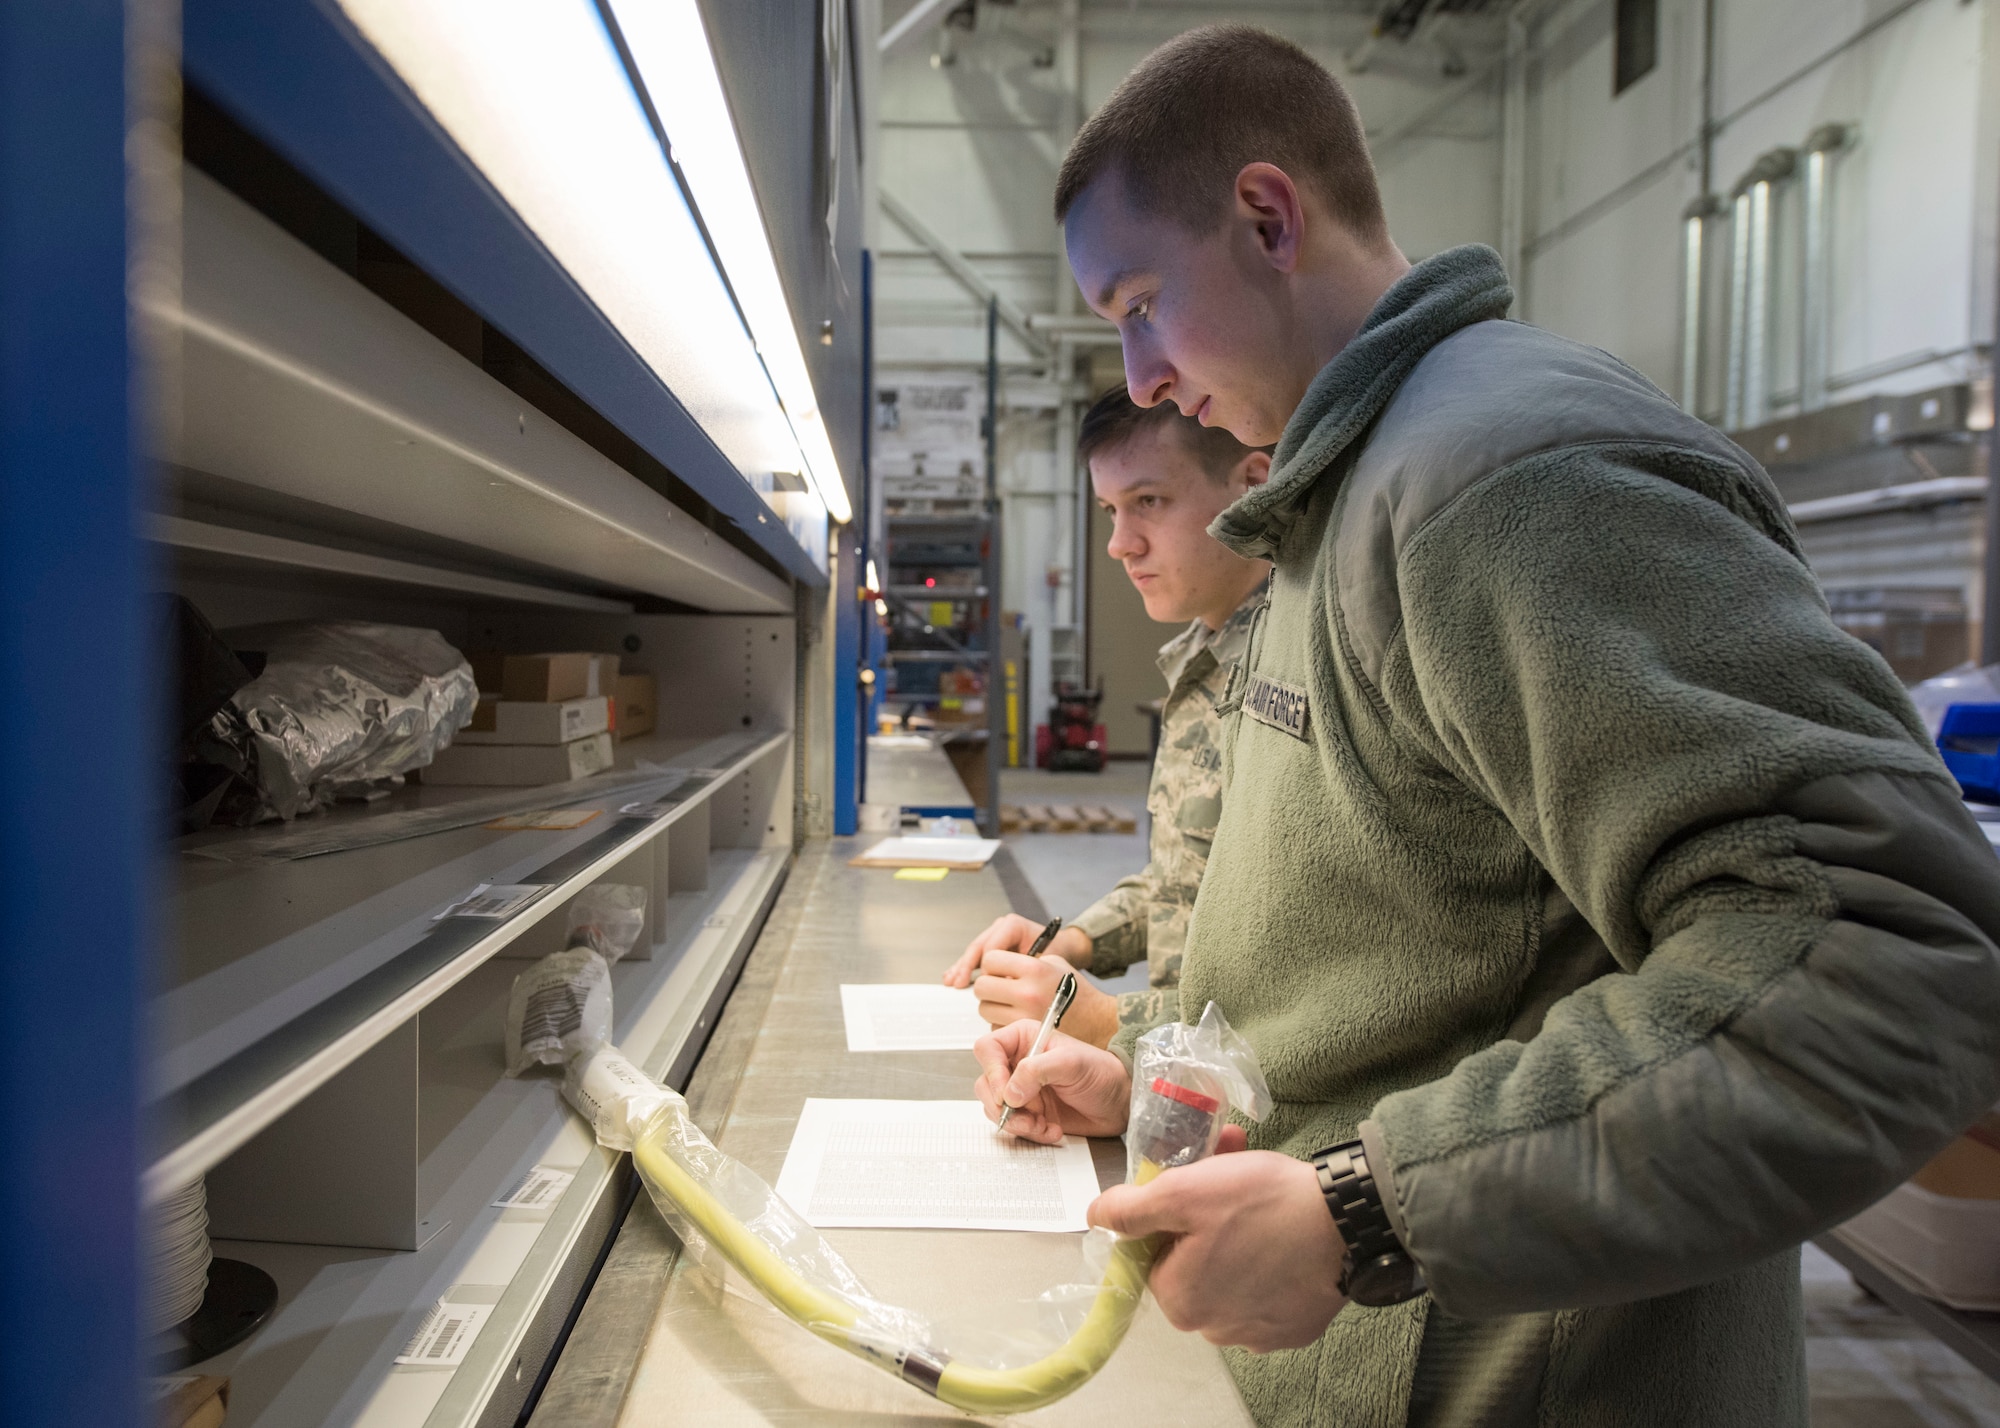 New Hampshire Air National Guardsmen Airman 1st Class Ryan Allen and Airman Timothy Gregoire, both from the 157th Logistics Readiness Squadron’s central storage, validate the specific location and stock numbers of parts, March 11, 2019, at Joint Base Elmendorf-Richardson, Alaska. While at JBER, the Guardsmen are training as well as helping with the transfer of all C-17 Globemaster III supply turnover from the 673d LRS to the Alaska Air National Guard’s 176th LRS.